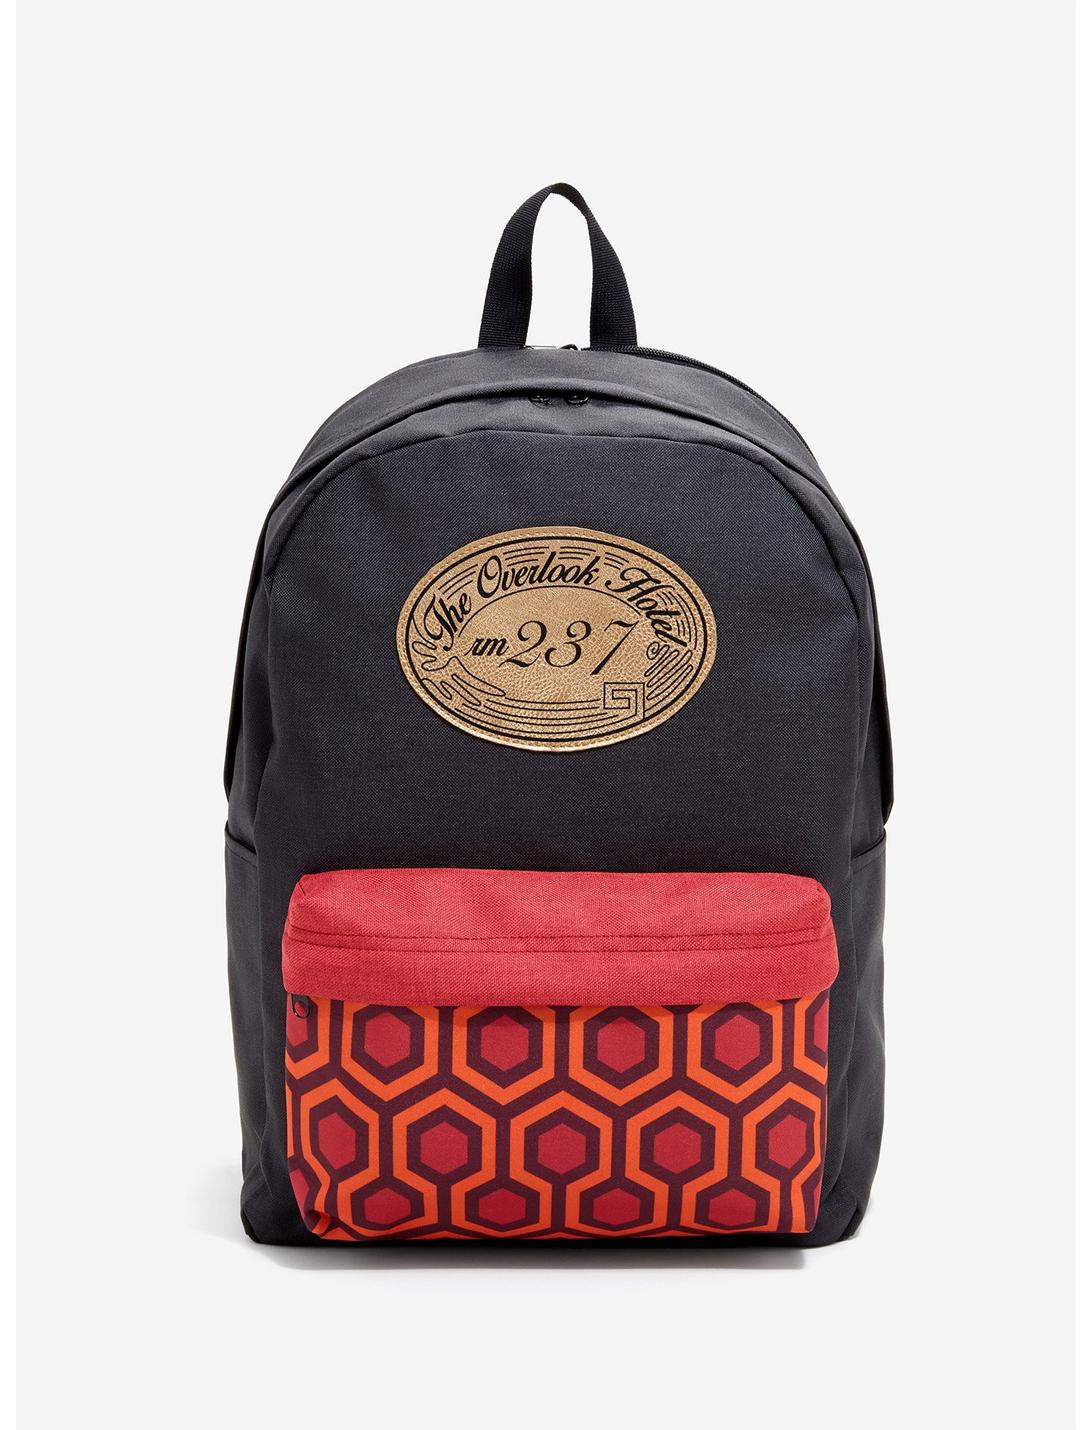 Overlook Hotel Casual Style Lightweight Canvas Backpack School Bag Travel Backpack